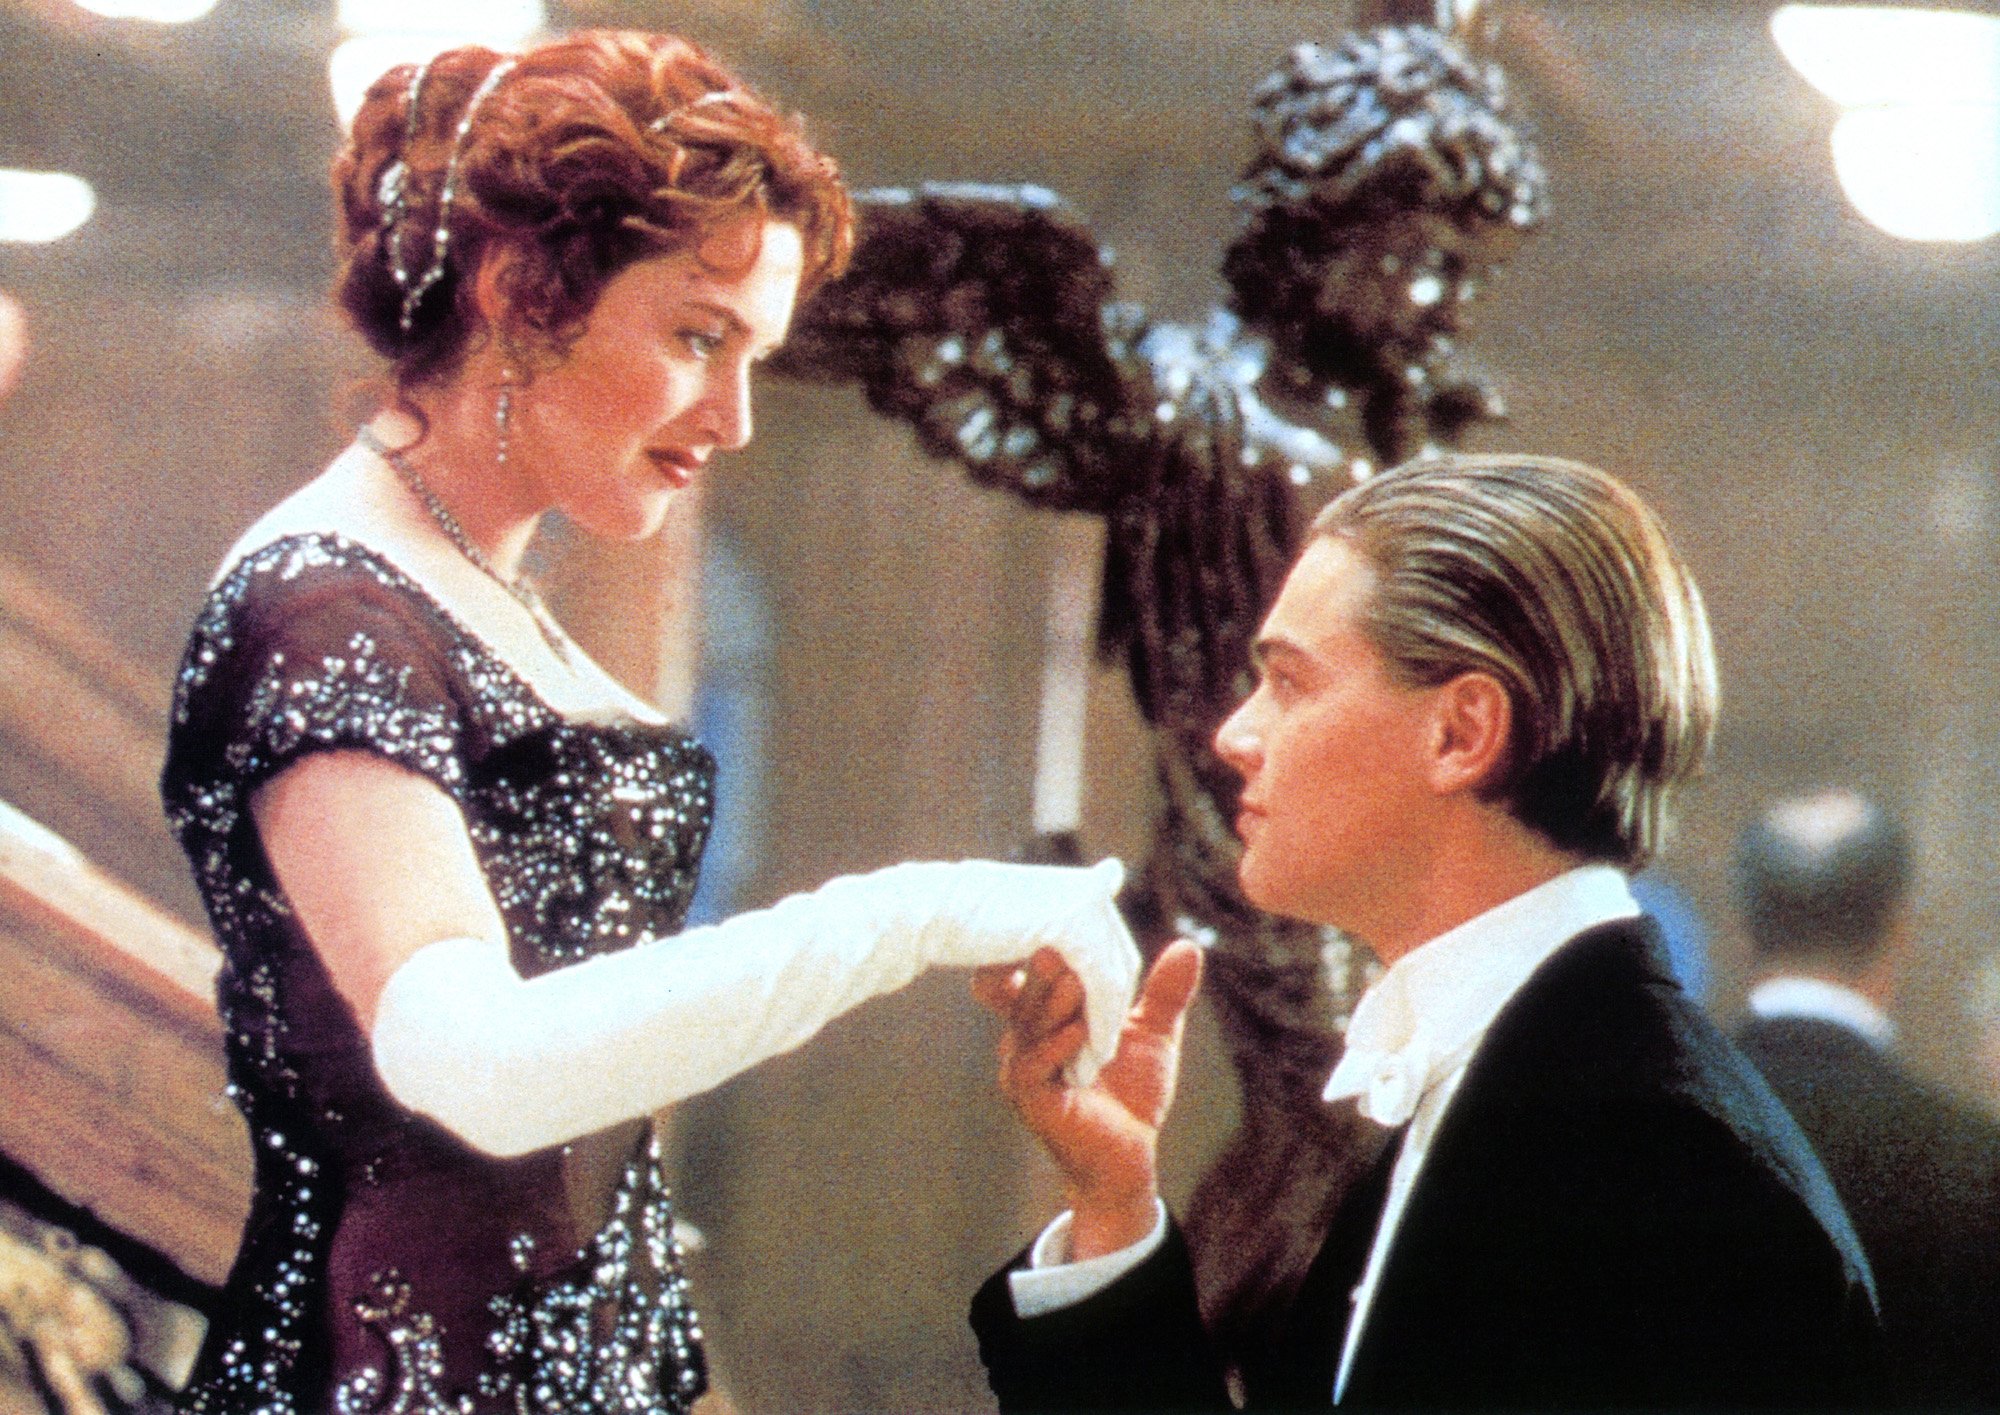 Kate Winslet offers her hand to Leonardo DiCaprio in a scene from the film